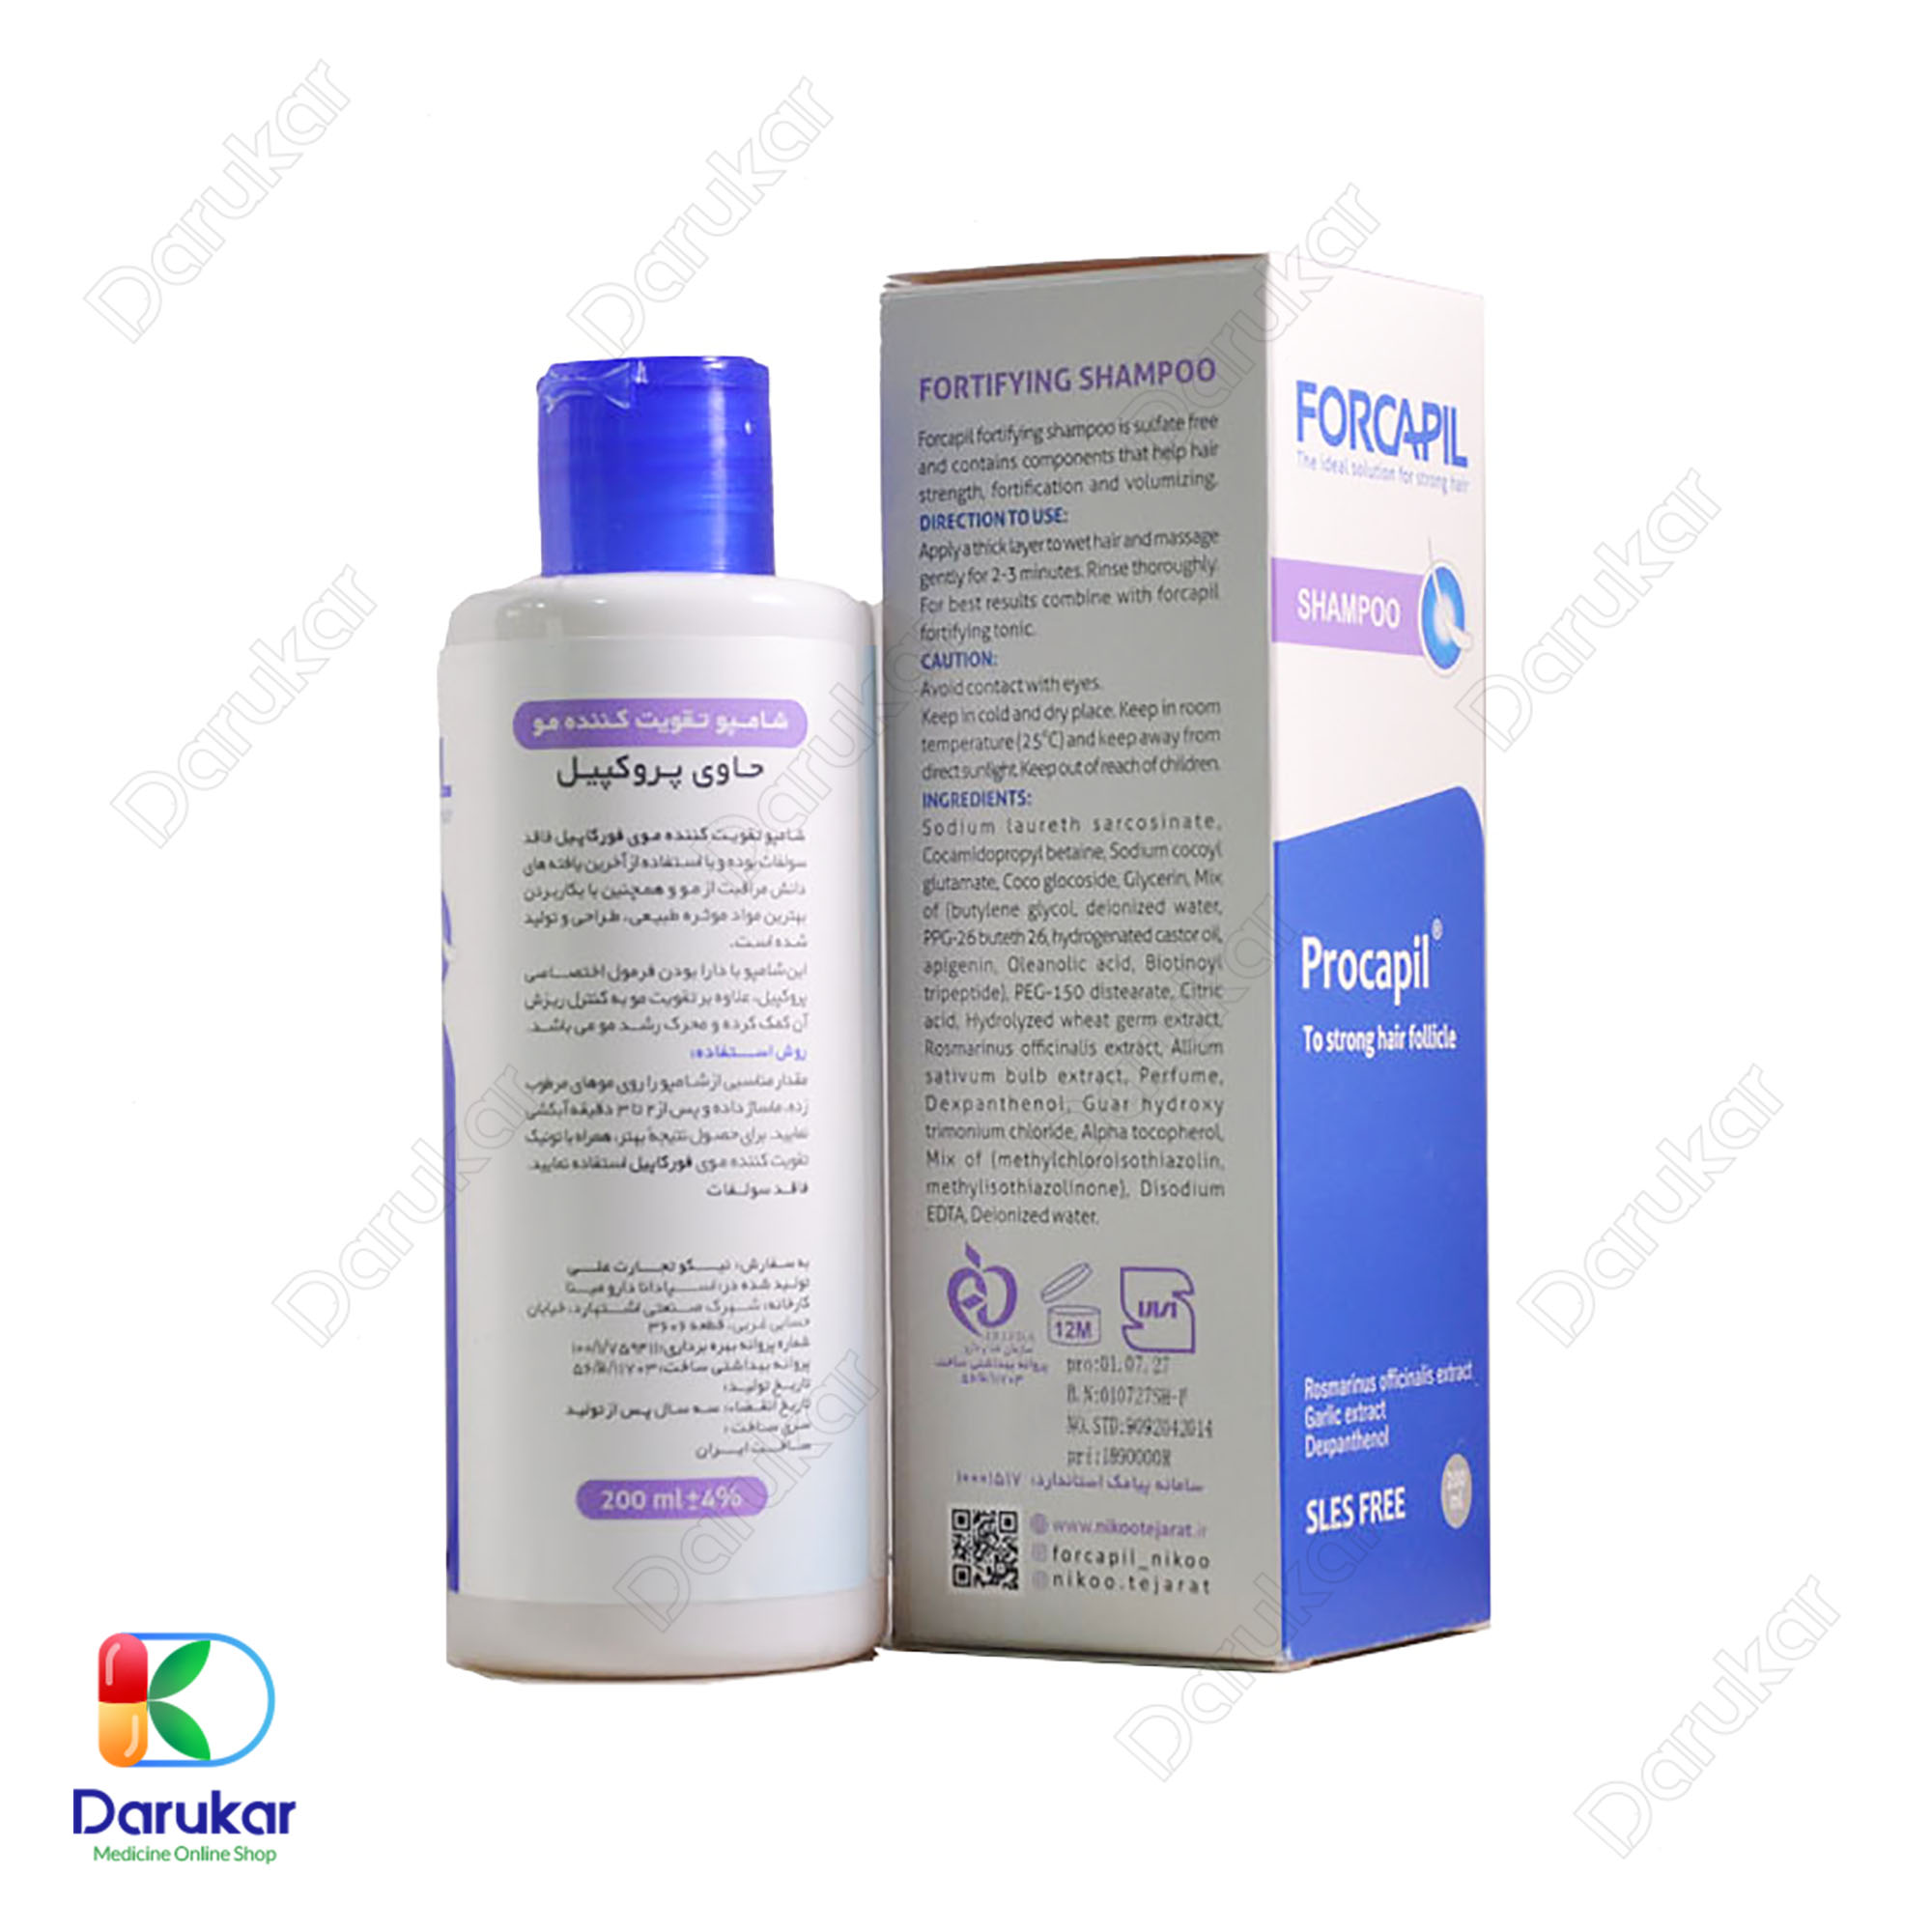 forcapil fortifying shampoo 2